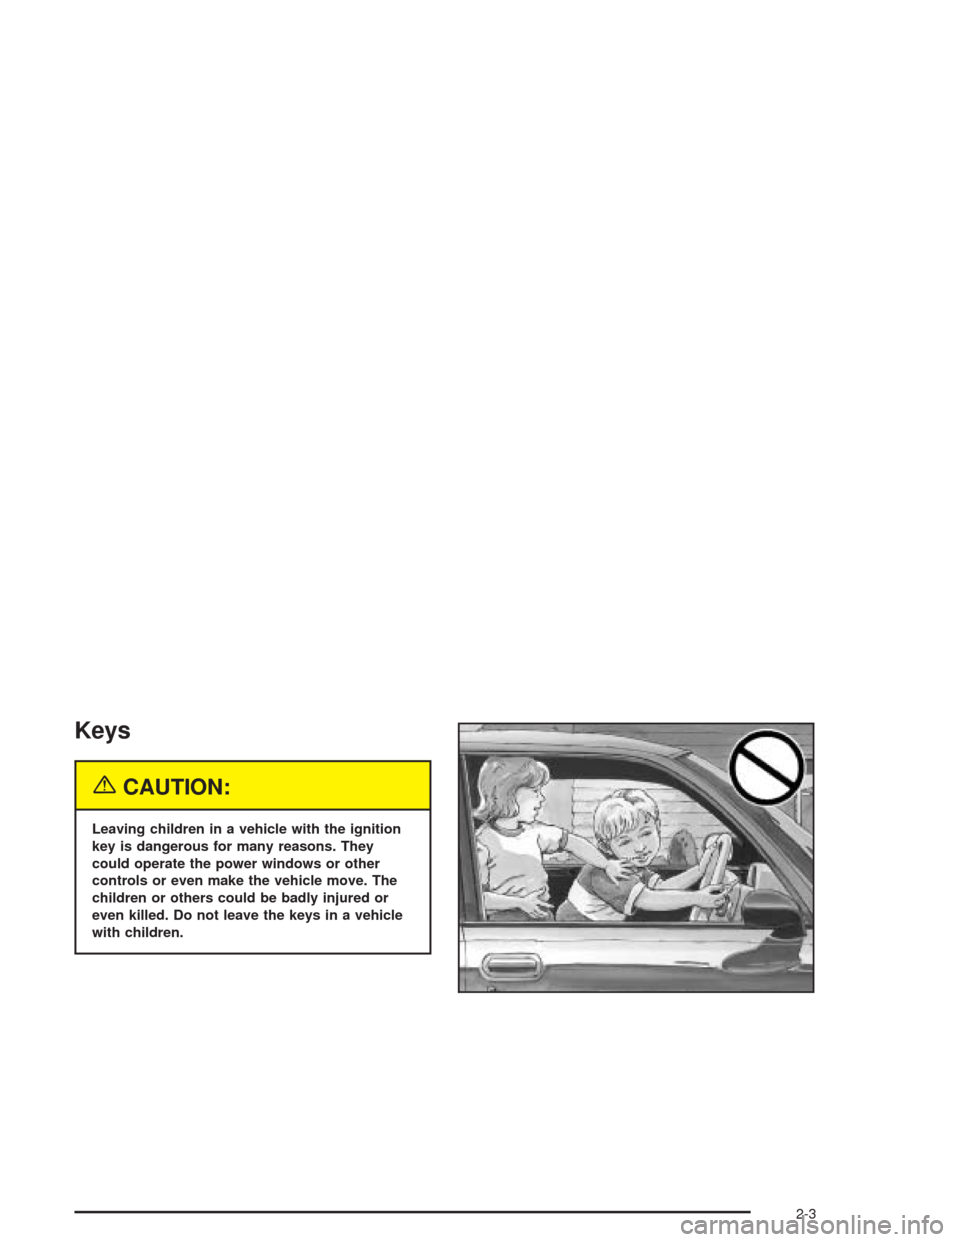 CHEVROLET AVALANCHE 2004 1.G Manual PDF Keys
{CAUTION:
Leaving children in a vehicle with the ignition
key is dangerous for many reasons. They
could operate the power windows or other
controls or even make the vehicle move. The
children or 